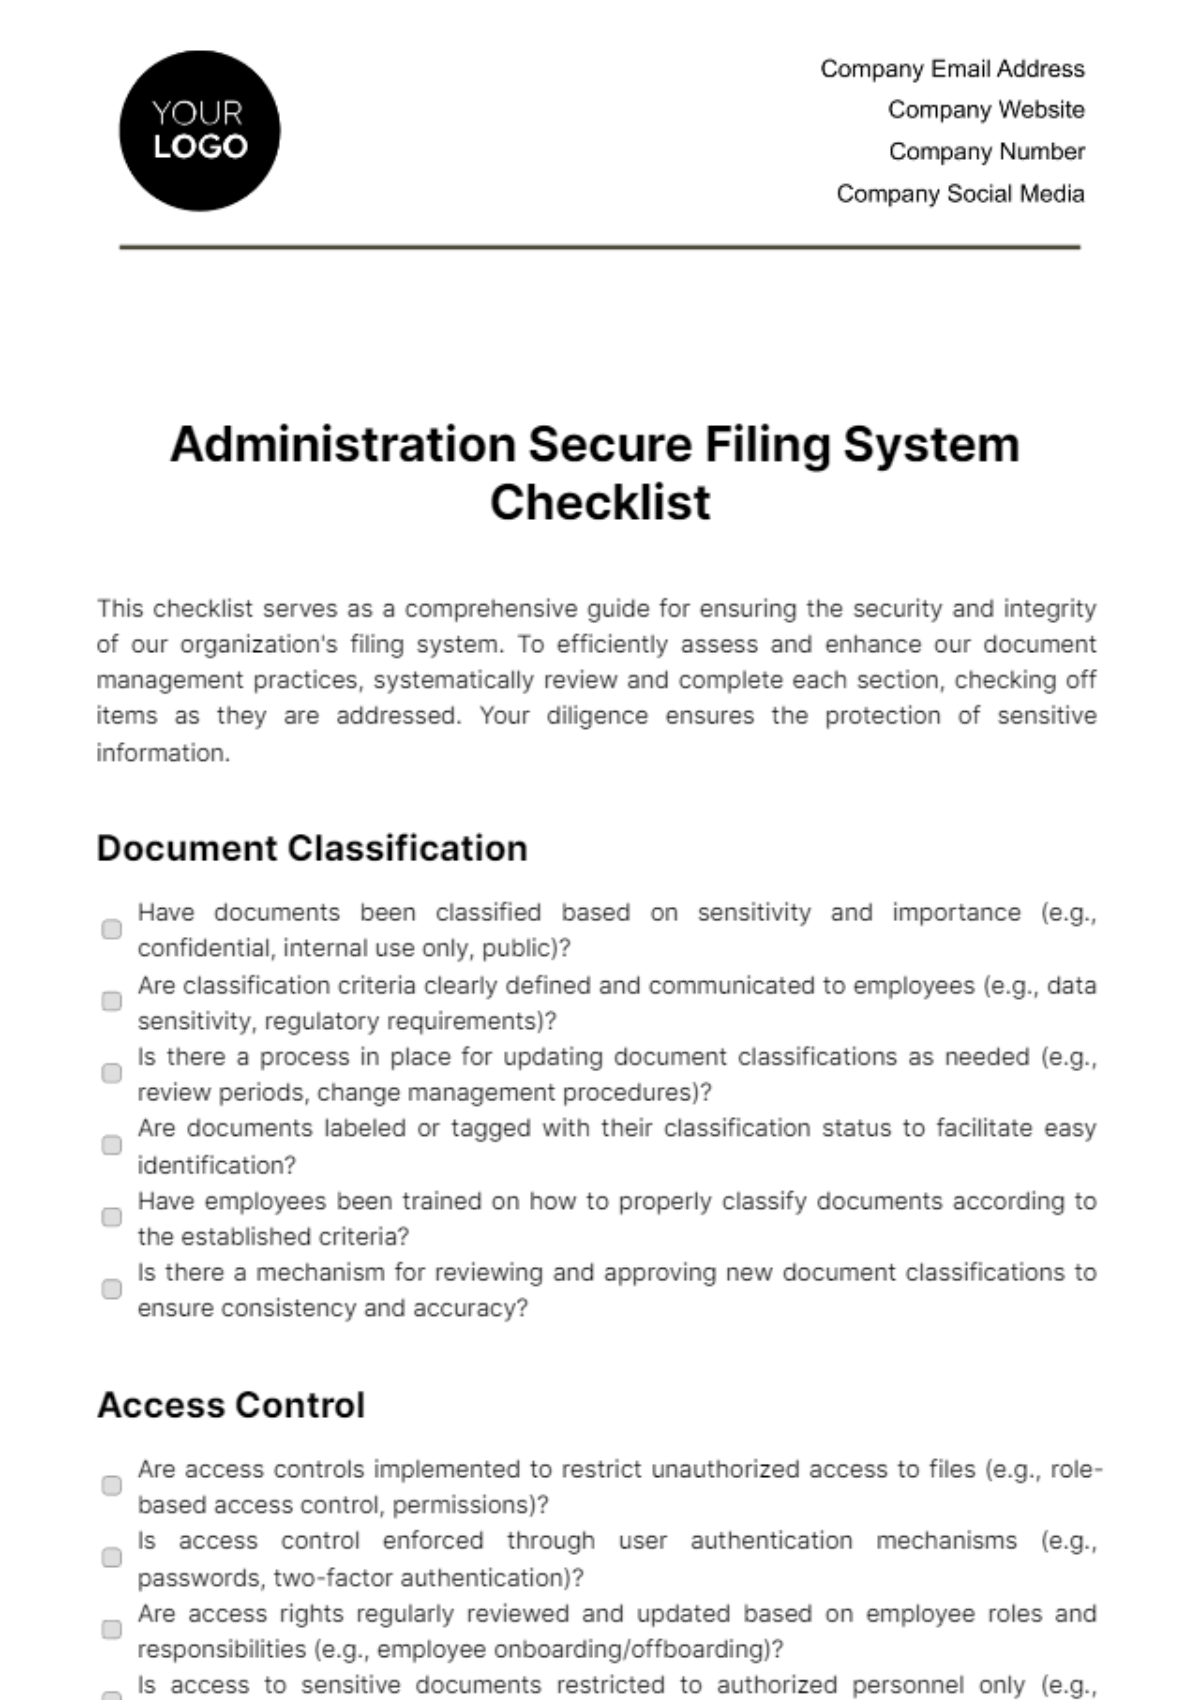 Administration Secure Filing System Checklist Template